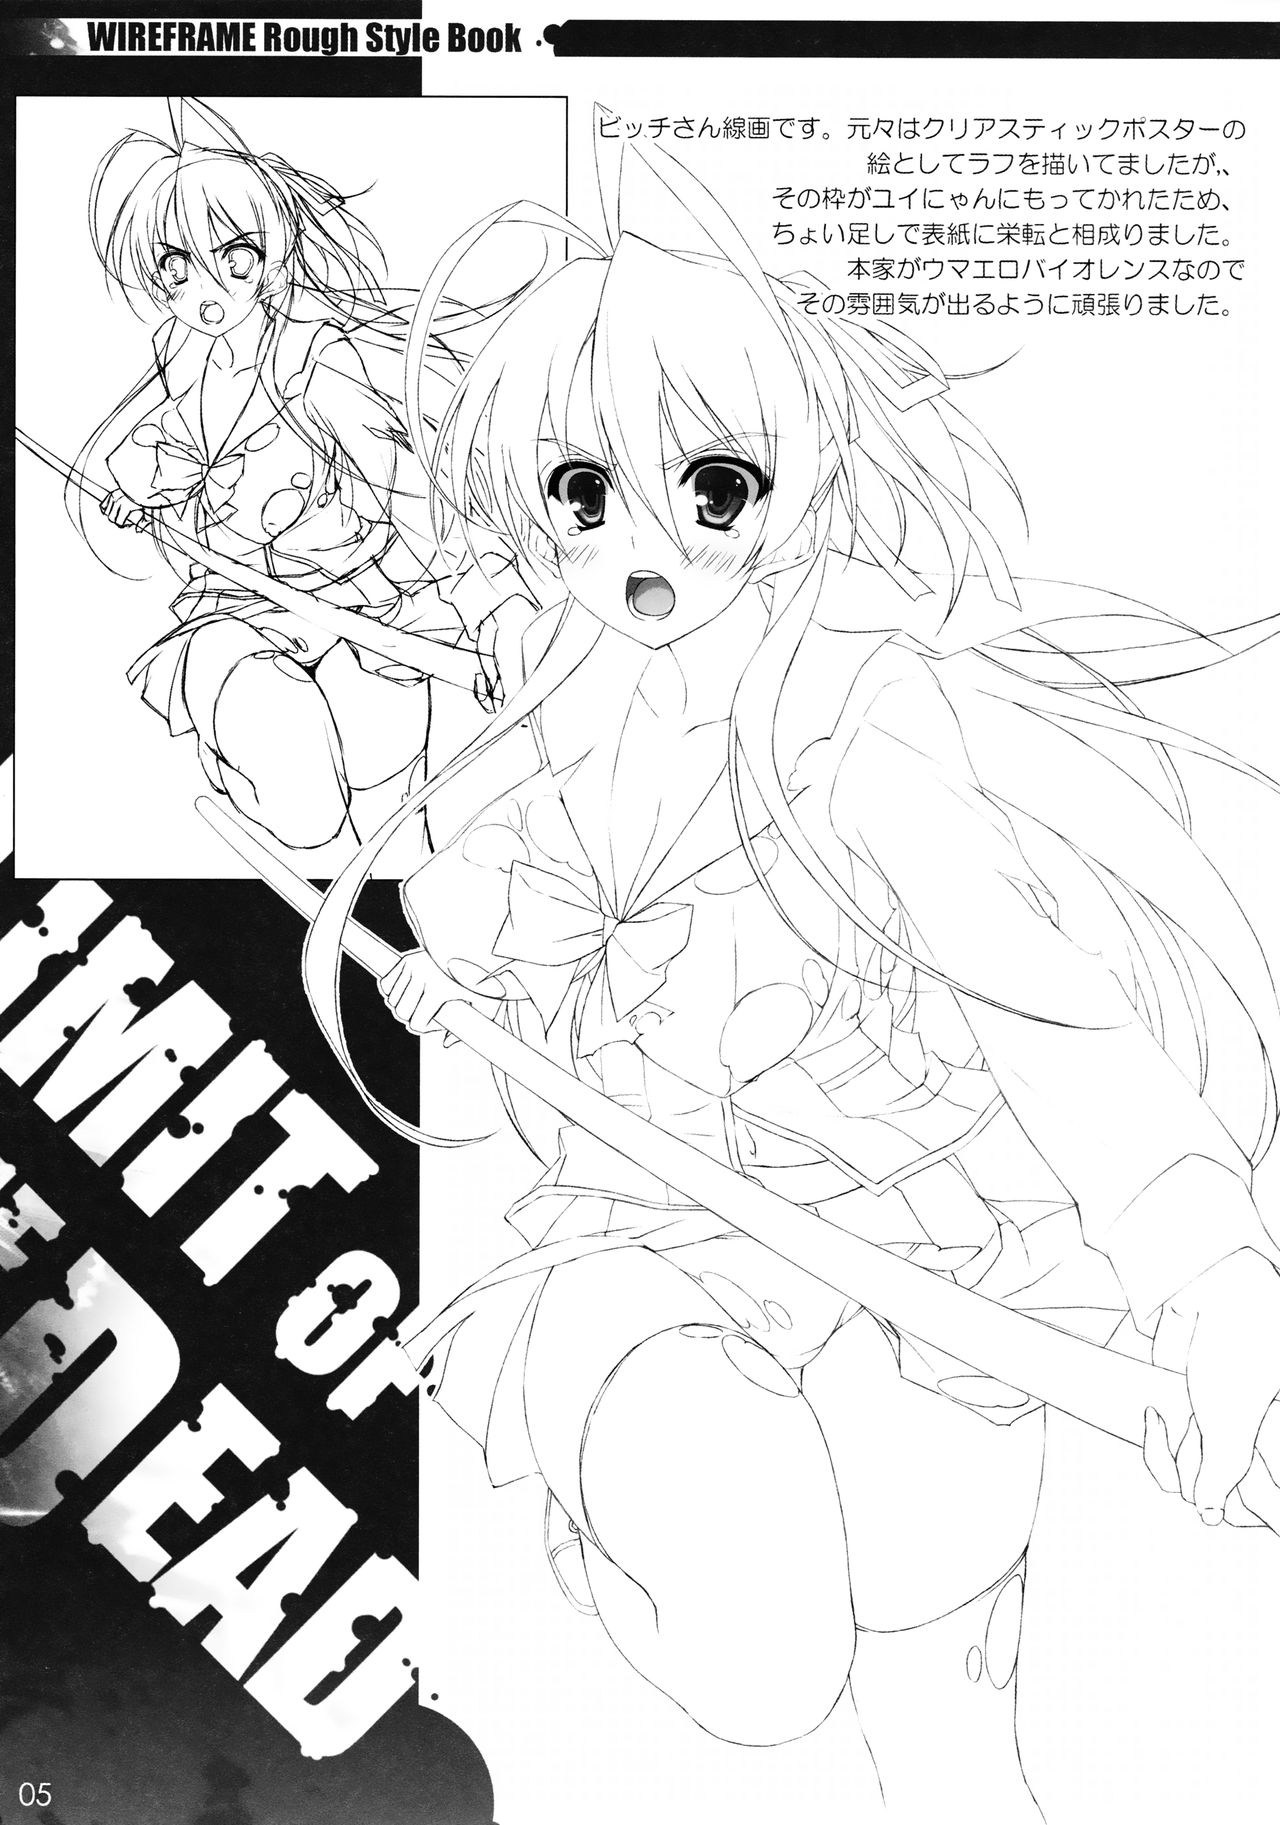 (C78) [WIREFRAME (憂姫はぐれ)] LIMIT OF THE DEAD (学園黙示録 HIGHSCHOOL OF THE DEAD)